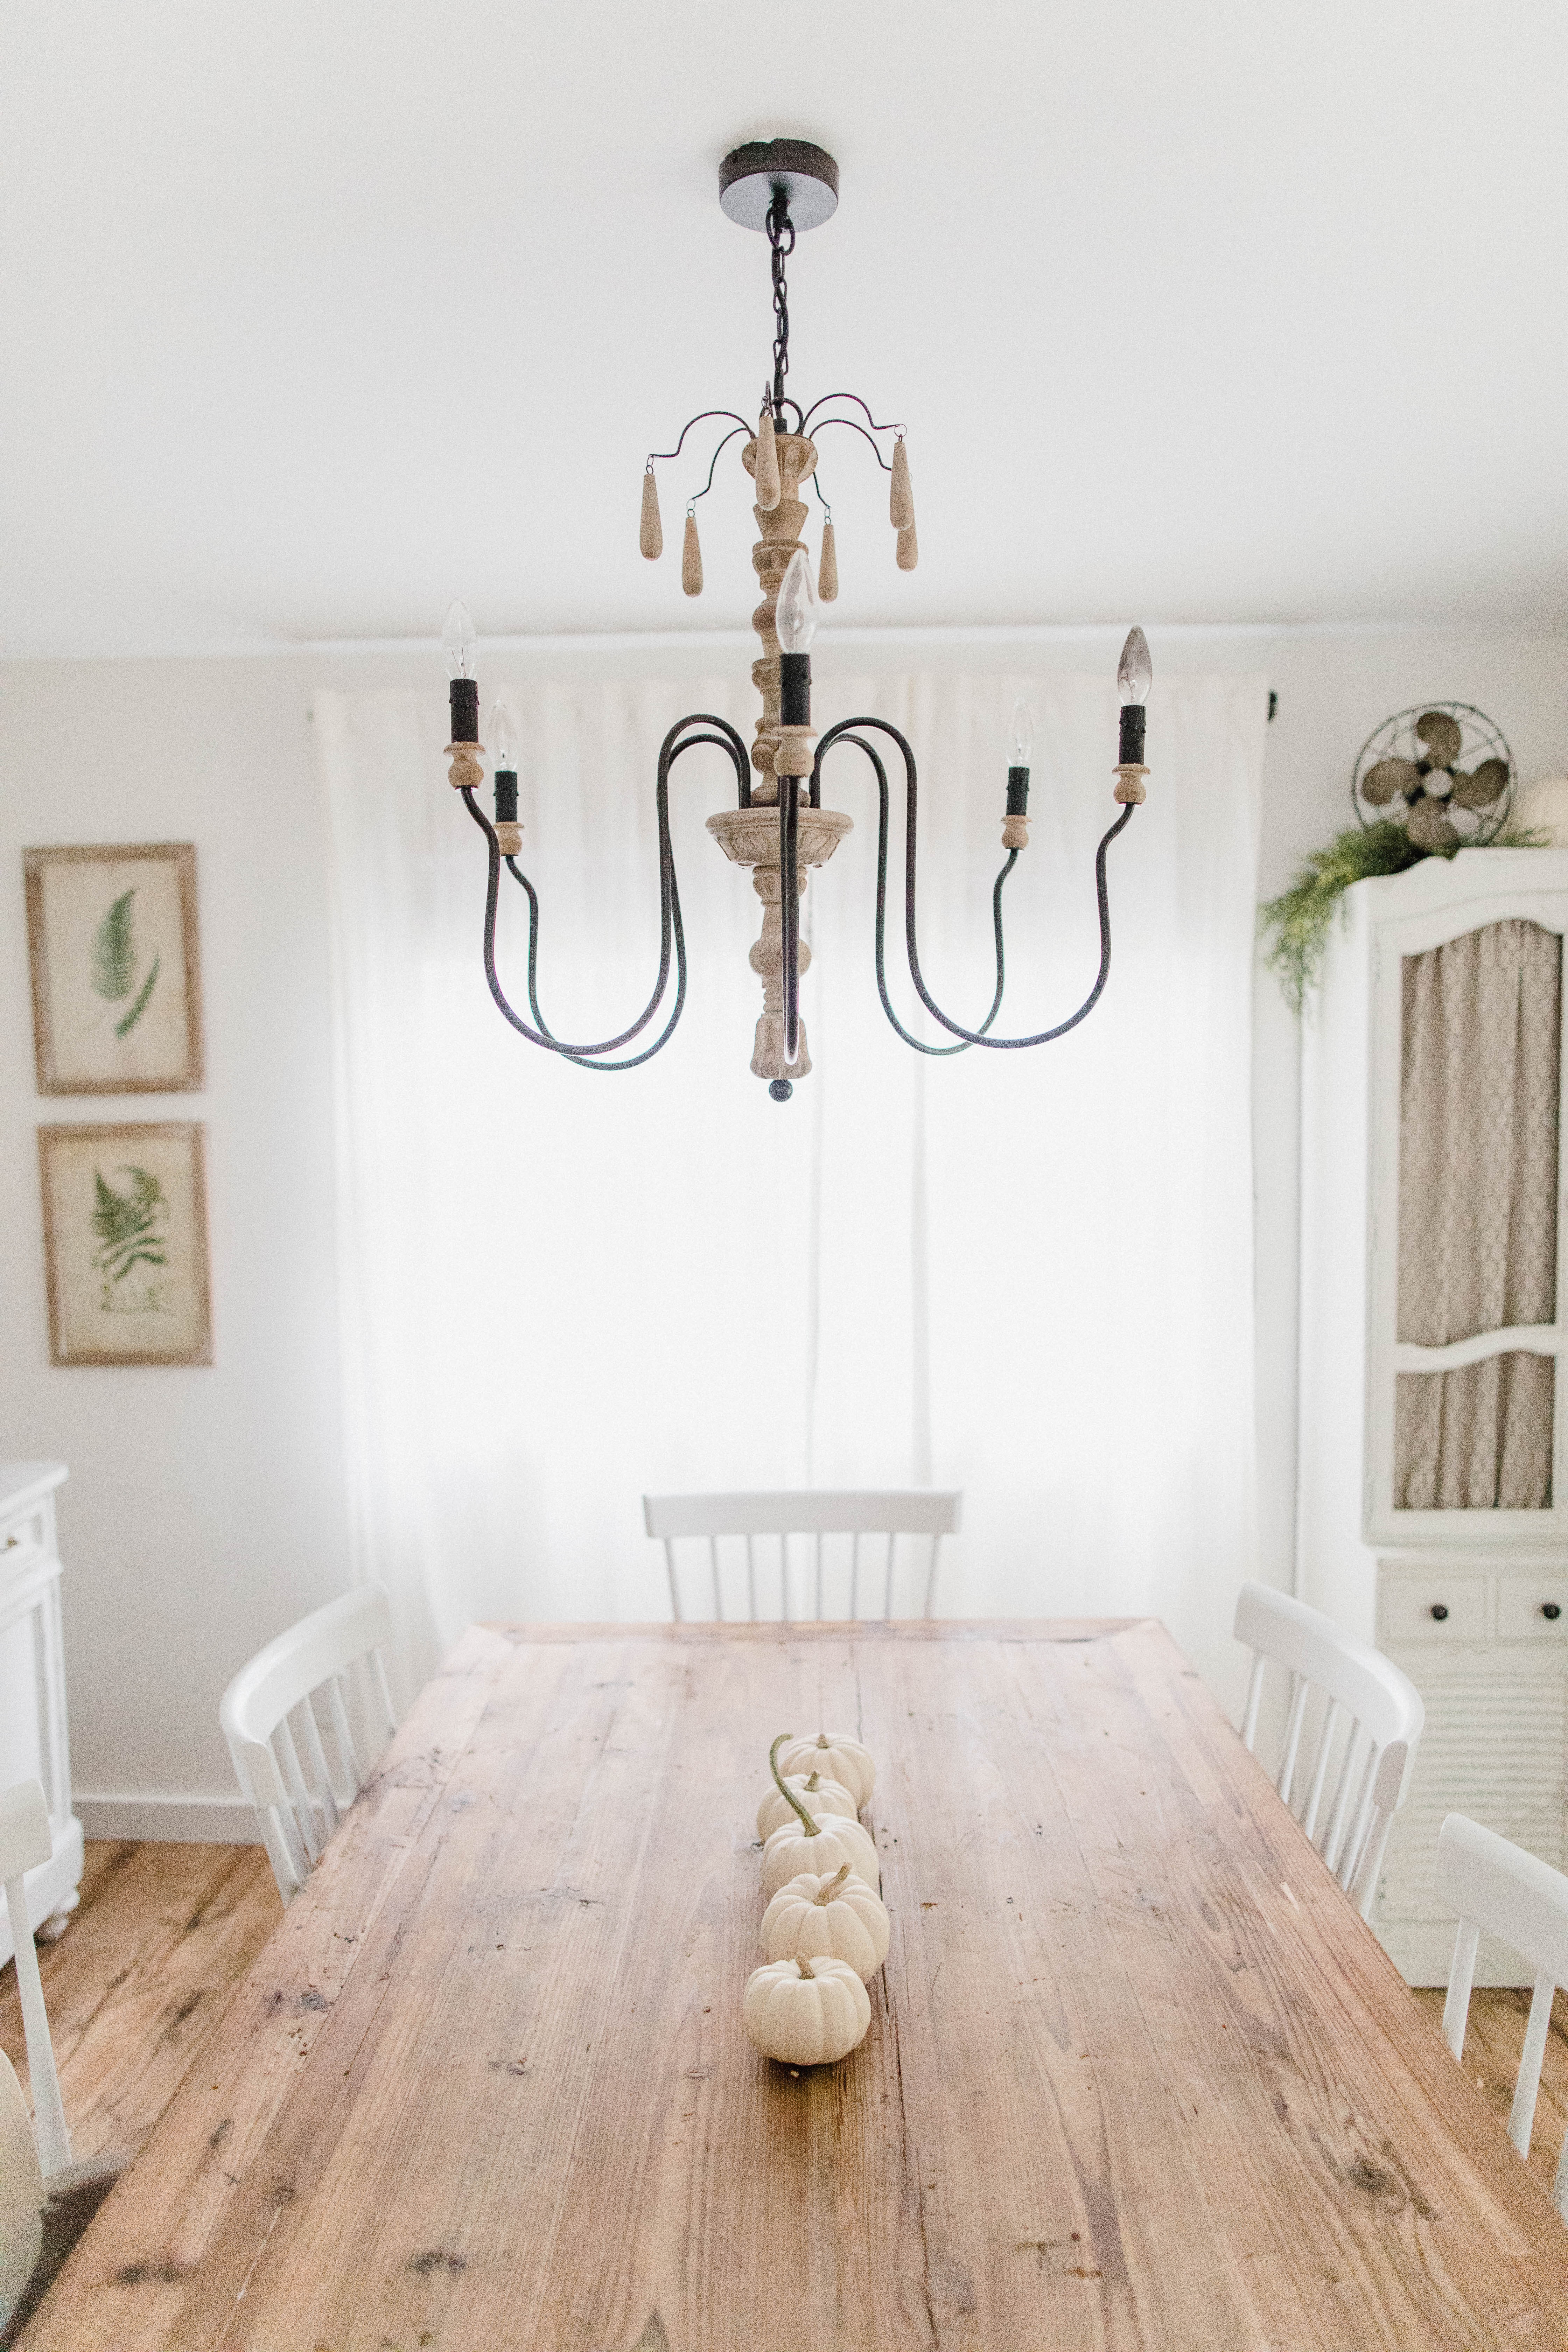 Connecticut life and style blogger Lauren McBride shares about the cost-effectiveness and energy efficiency of LED lighting in the home, as well as the difference in lighting color.